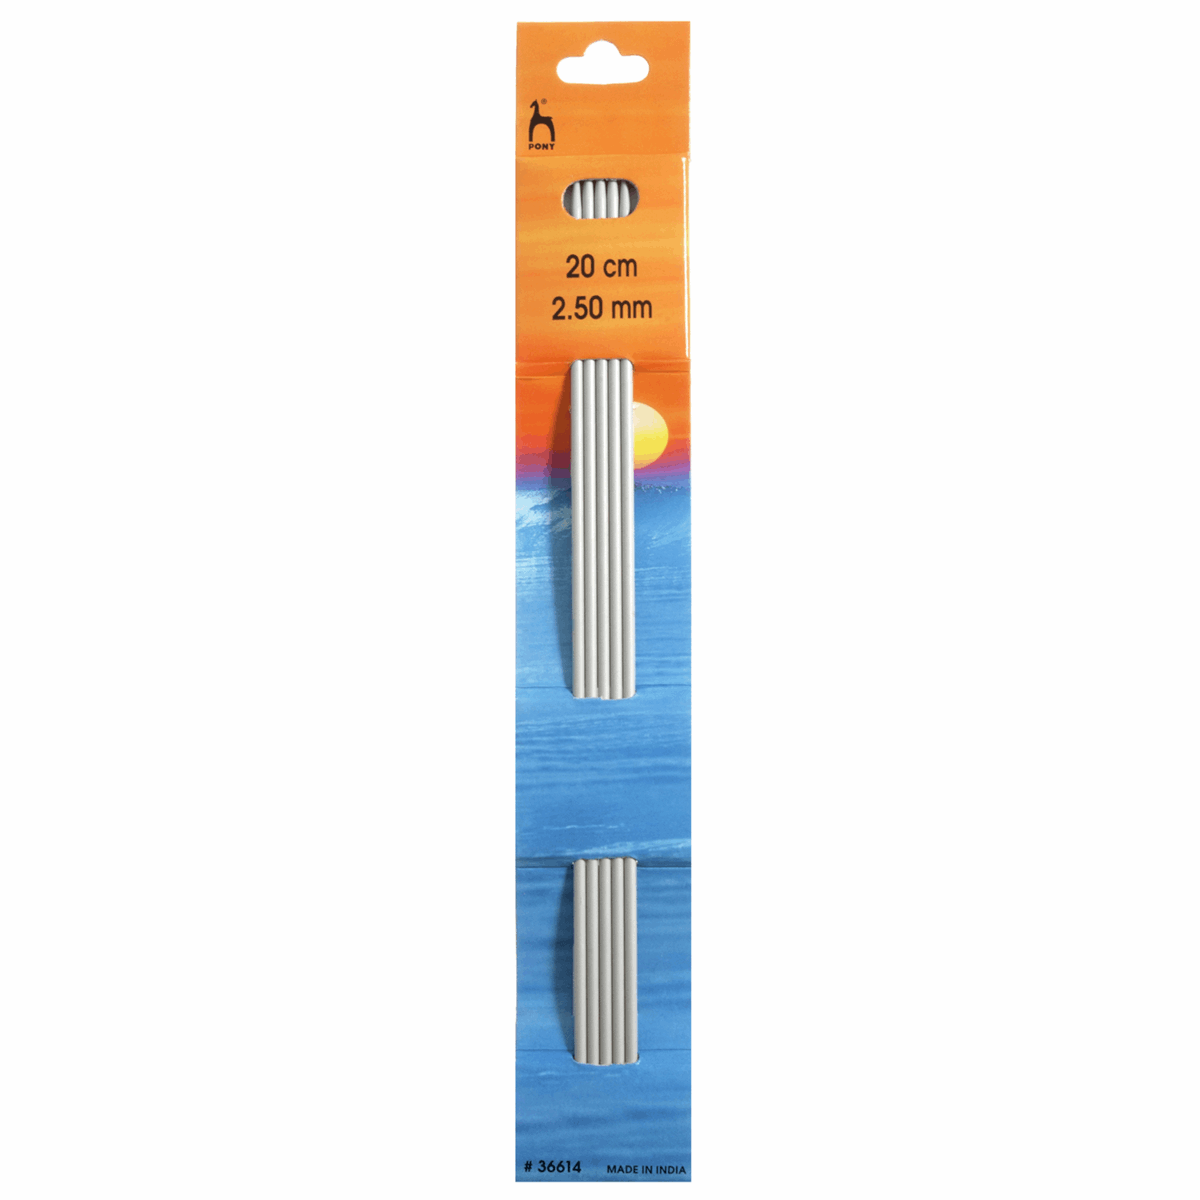 PONY Double-Ended Knitting Pins - 20cm x 2.50mm (Set of 5)